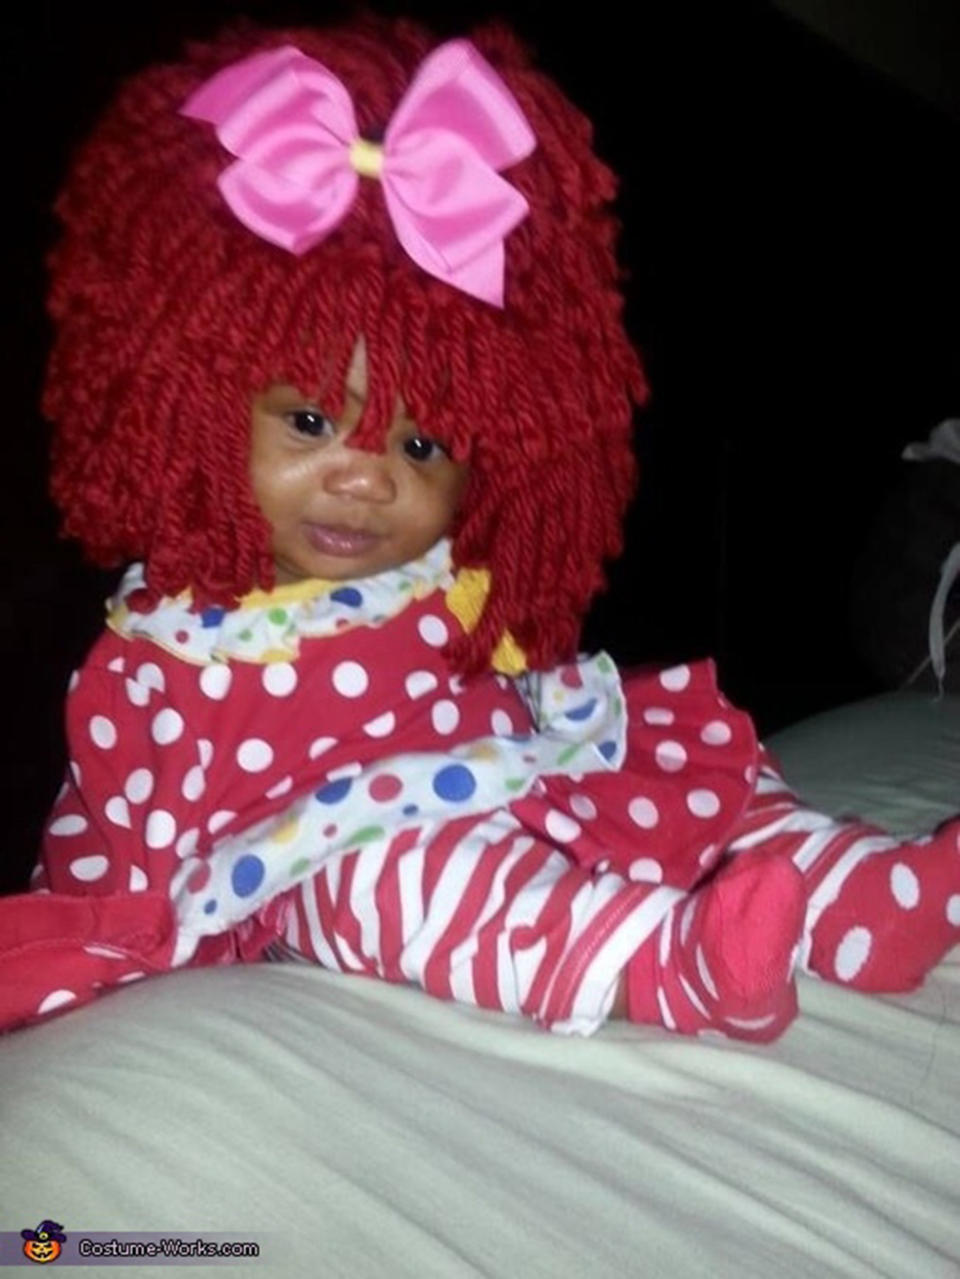 <a href="http://www.costume-works.com/costumes_for_babies/raggedy_ann17.html" target="_blank">via Costume Works </a>